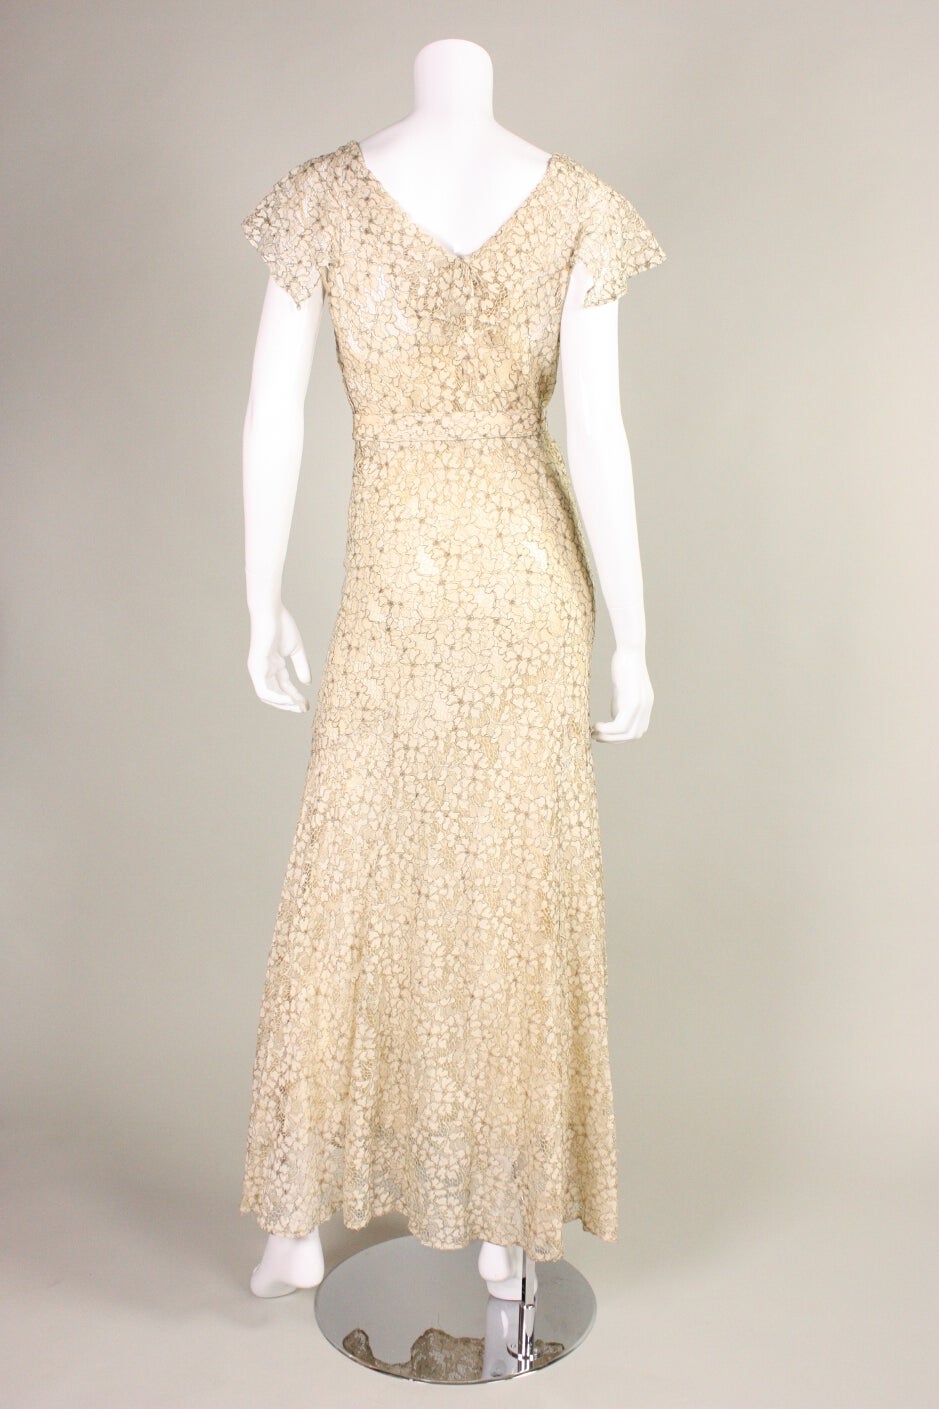 1930's Lamé Lace Ivory Bias-Cut Gown For Sale at 1stdibs